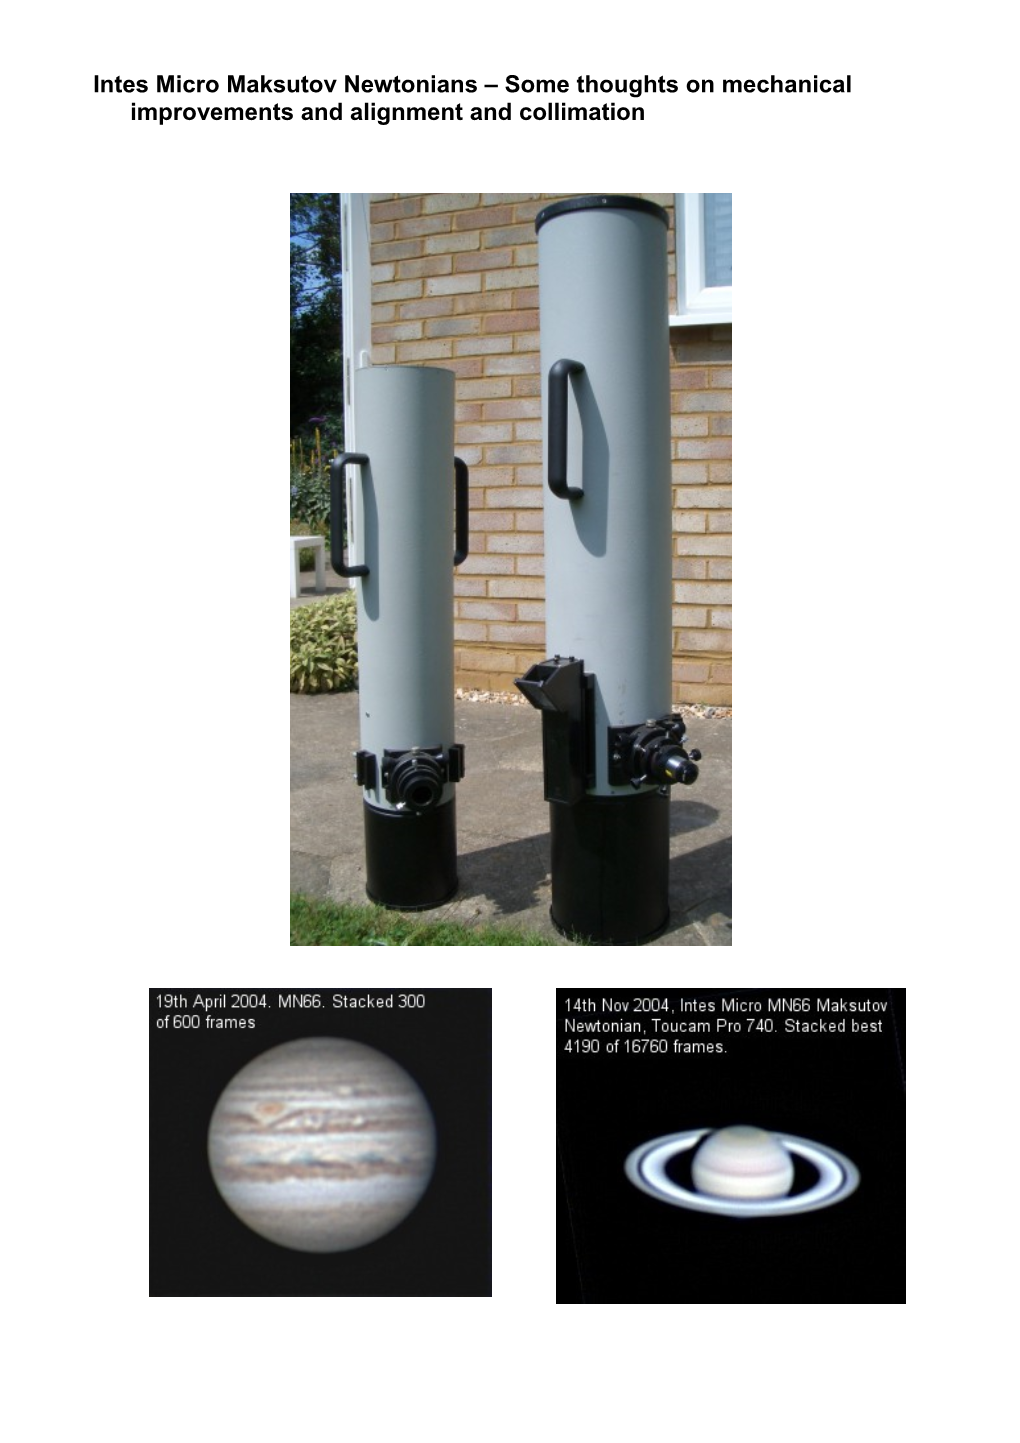 Intes Micro Maksutov Newtonians Some Thoughts on Collimation